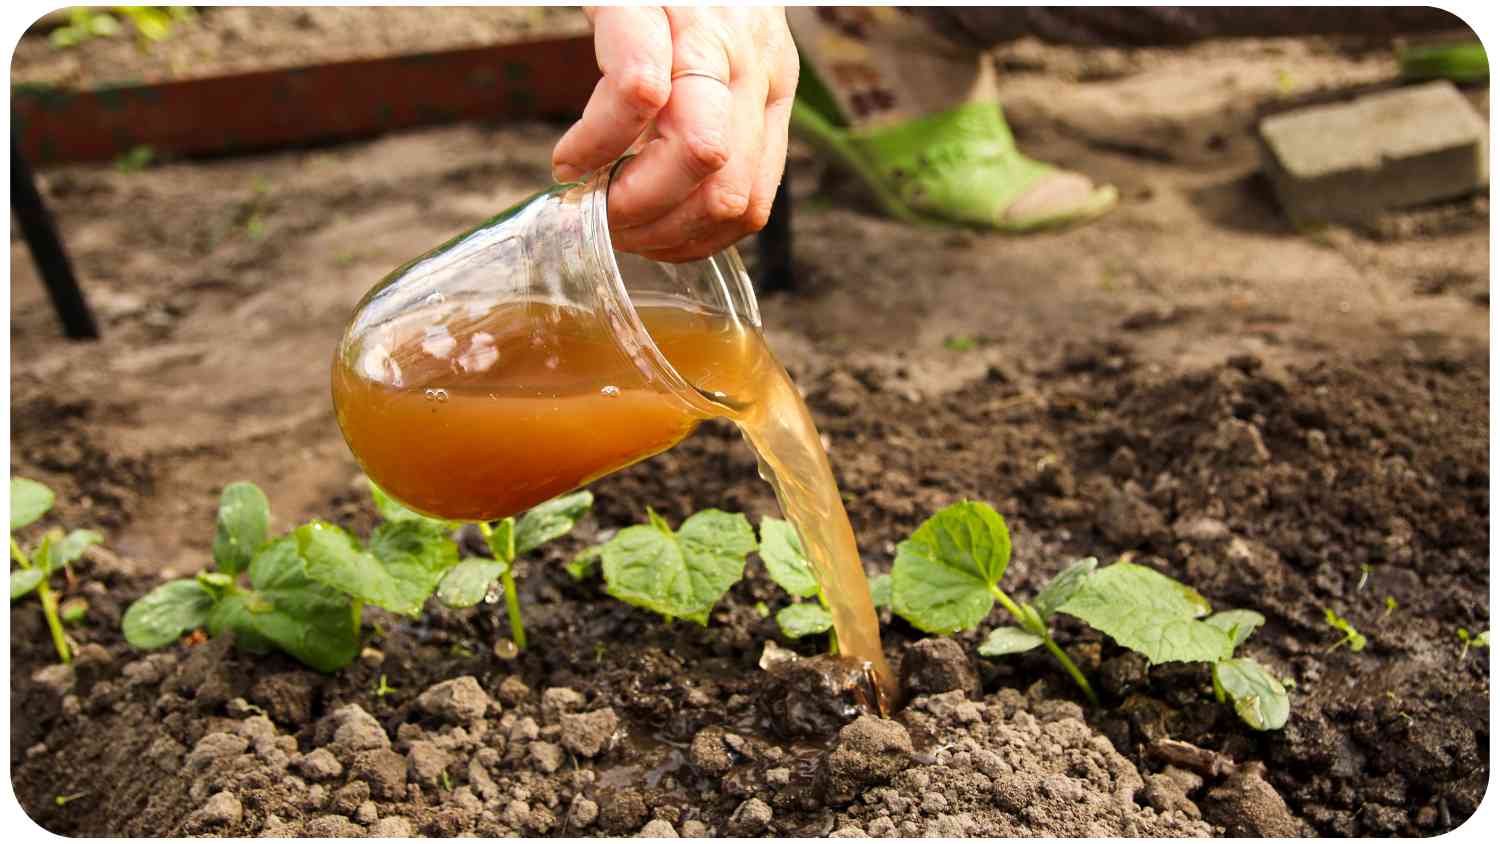 a person is pouring liquid from a glass into a garden